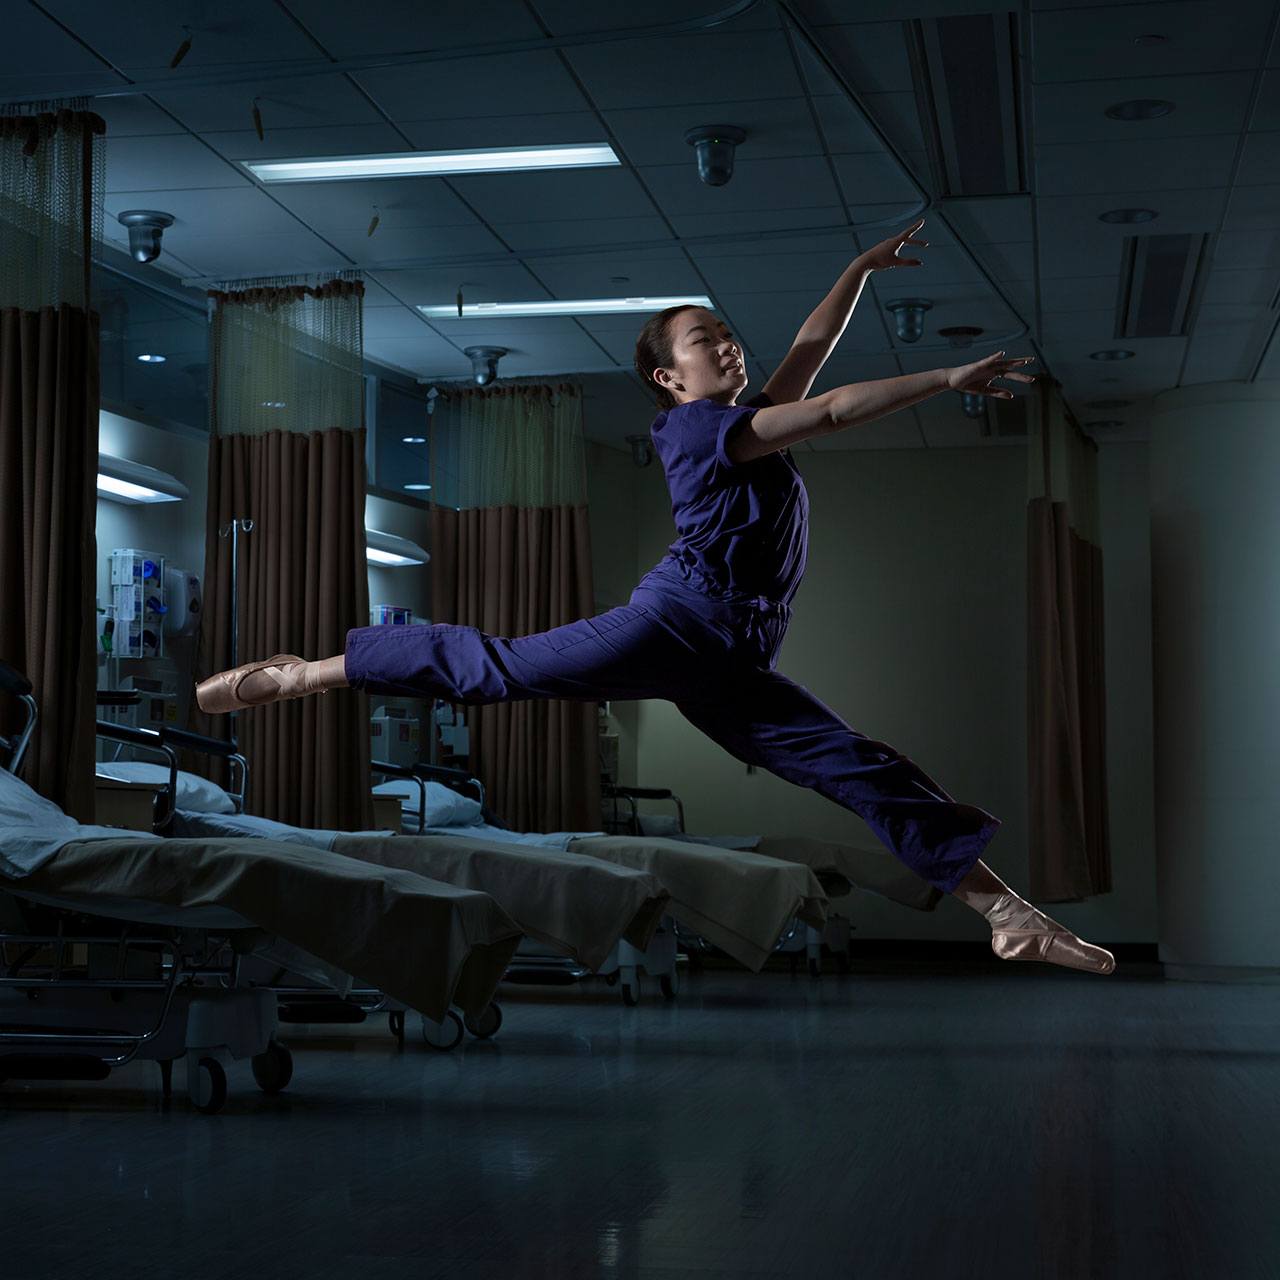 Nursing student Brittney Tam leaping in the air in a hospital room.